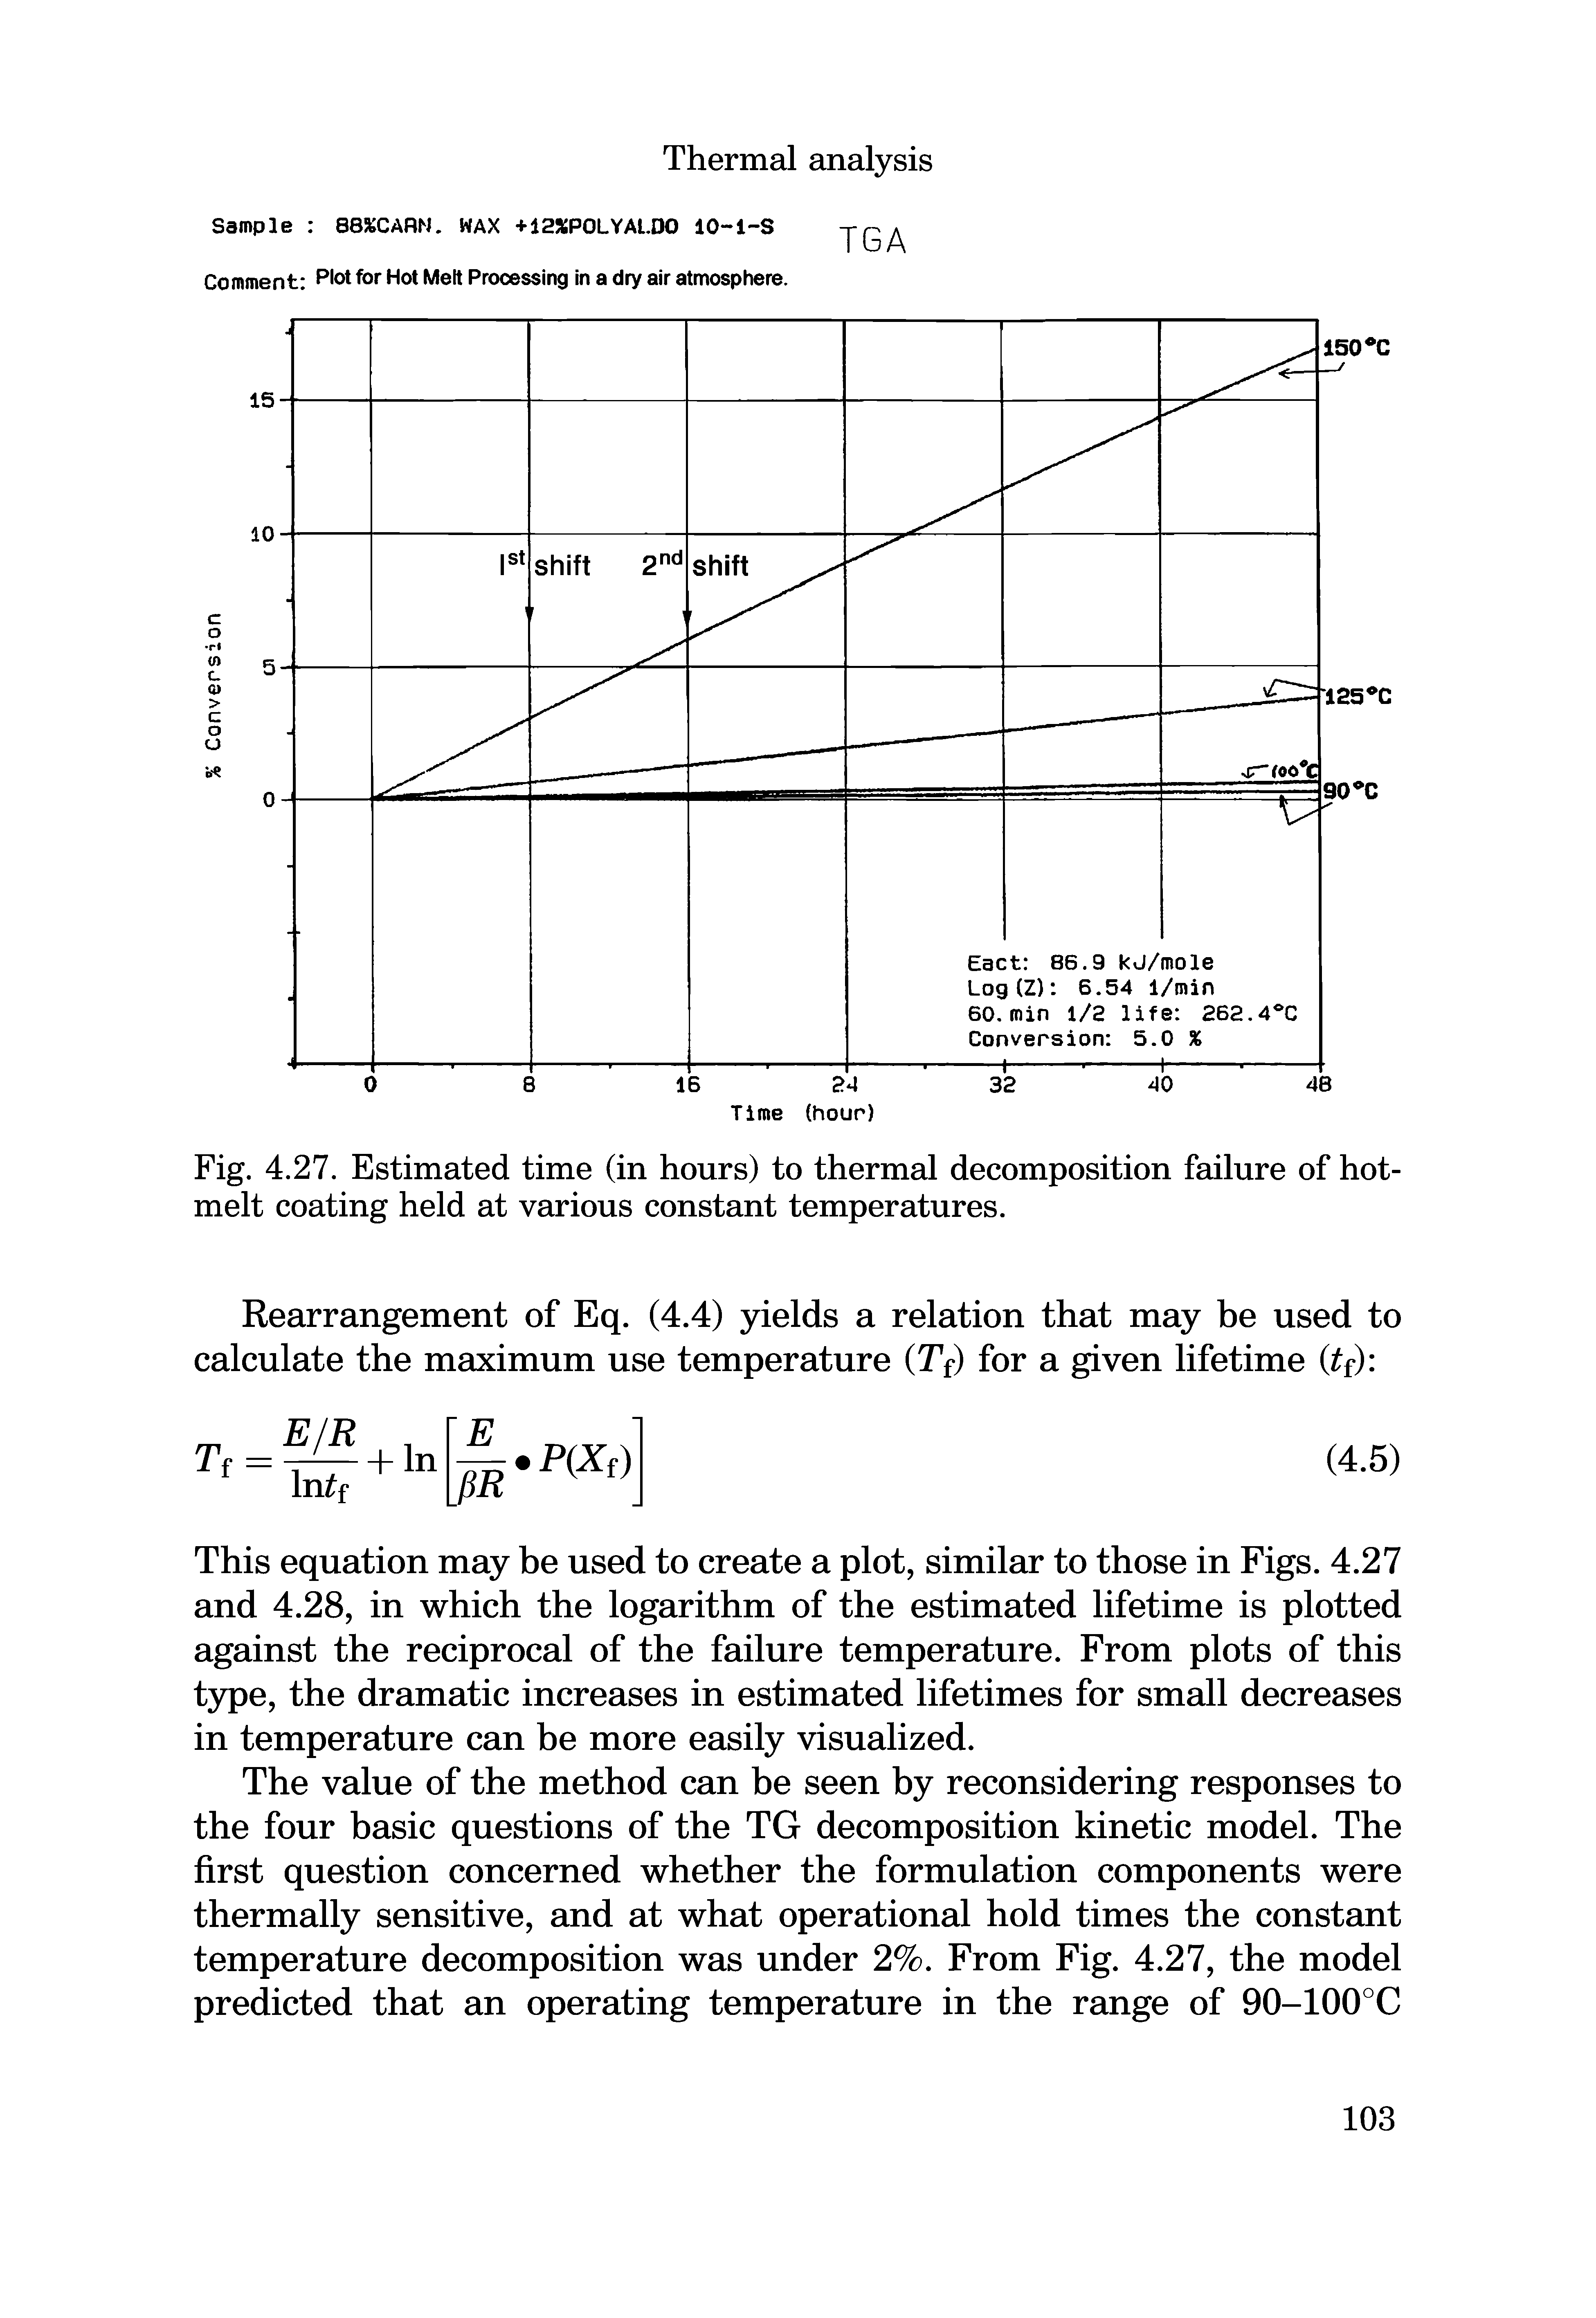 Fig. 4.27. Estimated time (in hours) to thermal decomposition failure of hot-melt coating held at various constant temperatures.